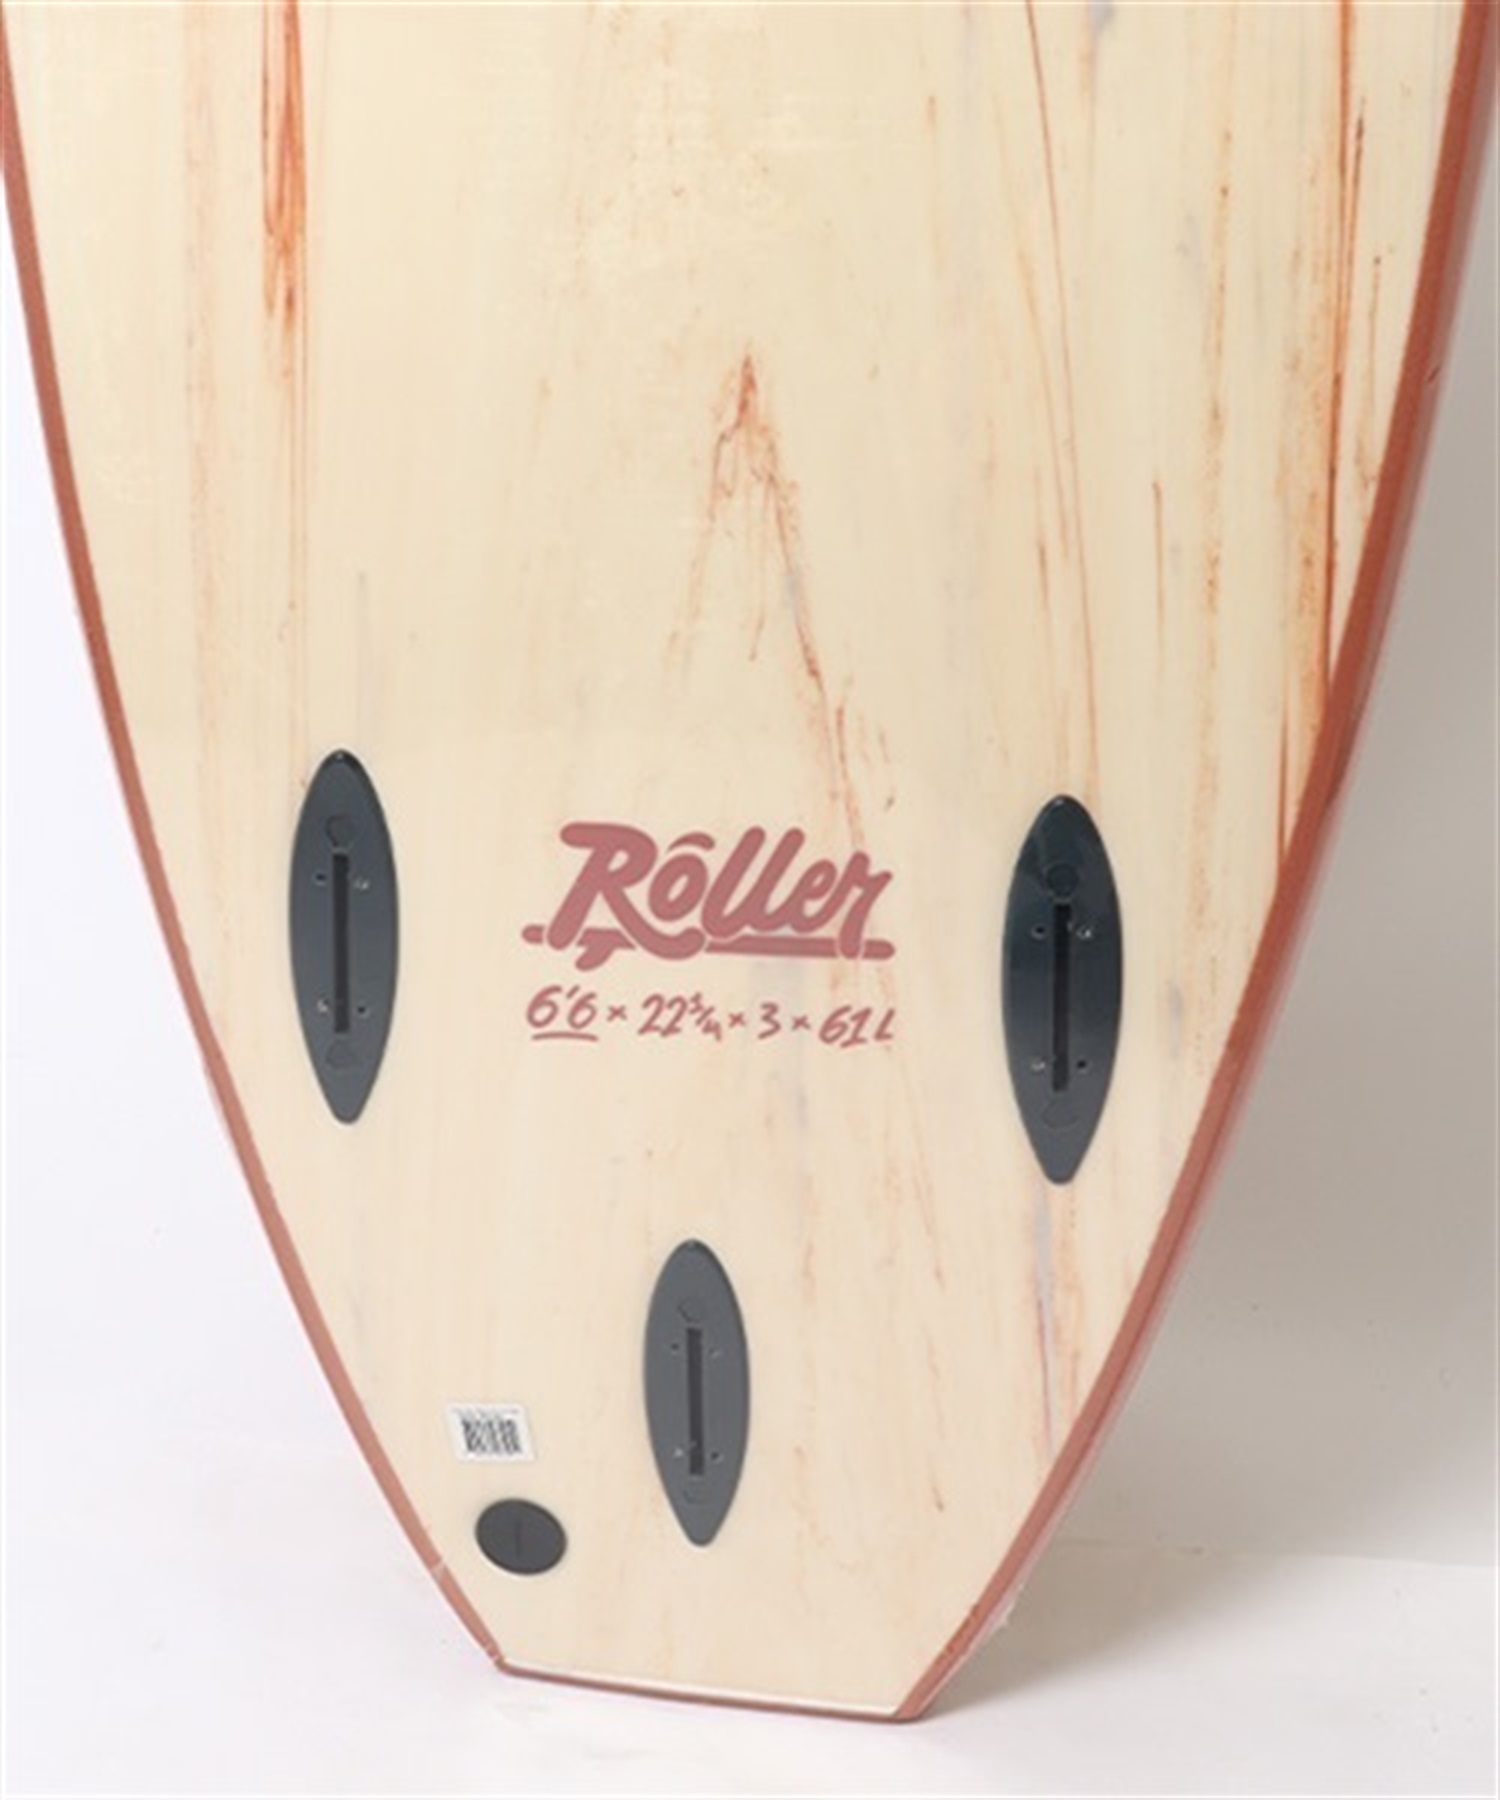 SOFTECH ソフテック ROLLER ローラー 7'0 CLY サーフボード ミッド ソフトボード JJ E31(CLY-7.0)